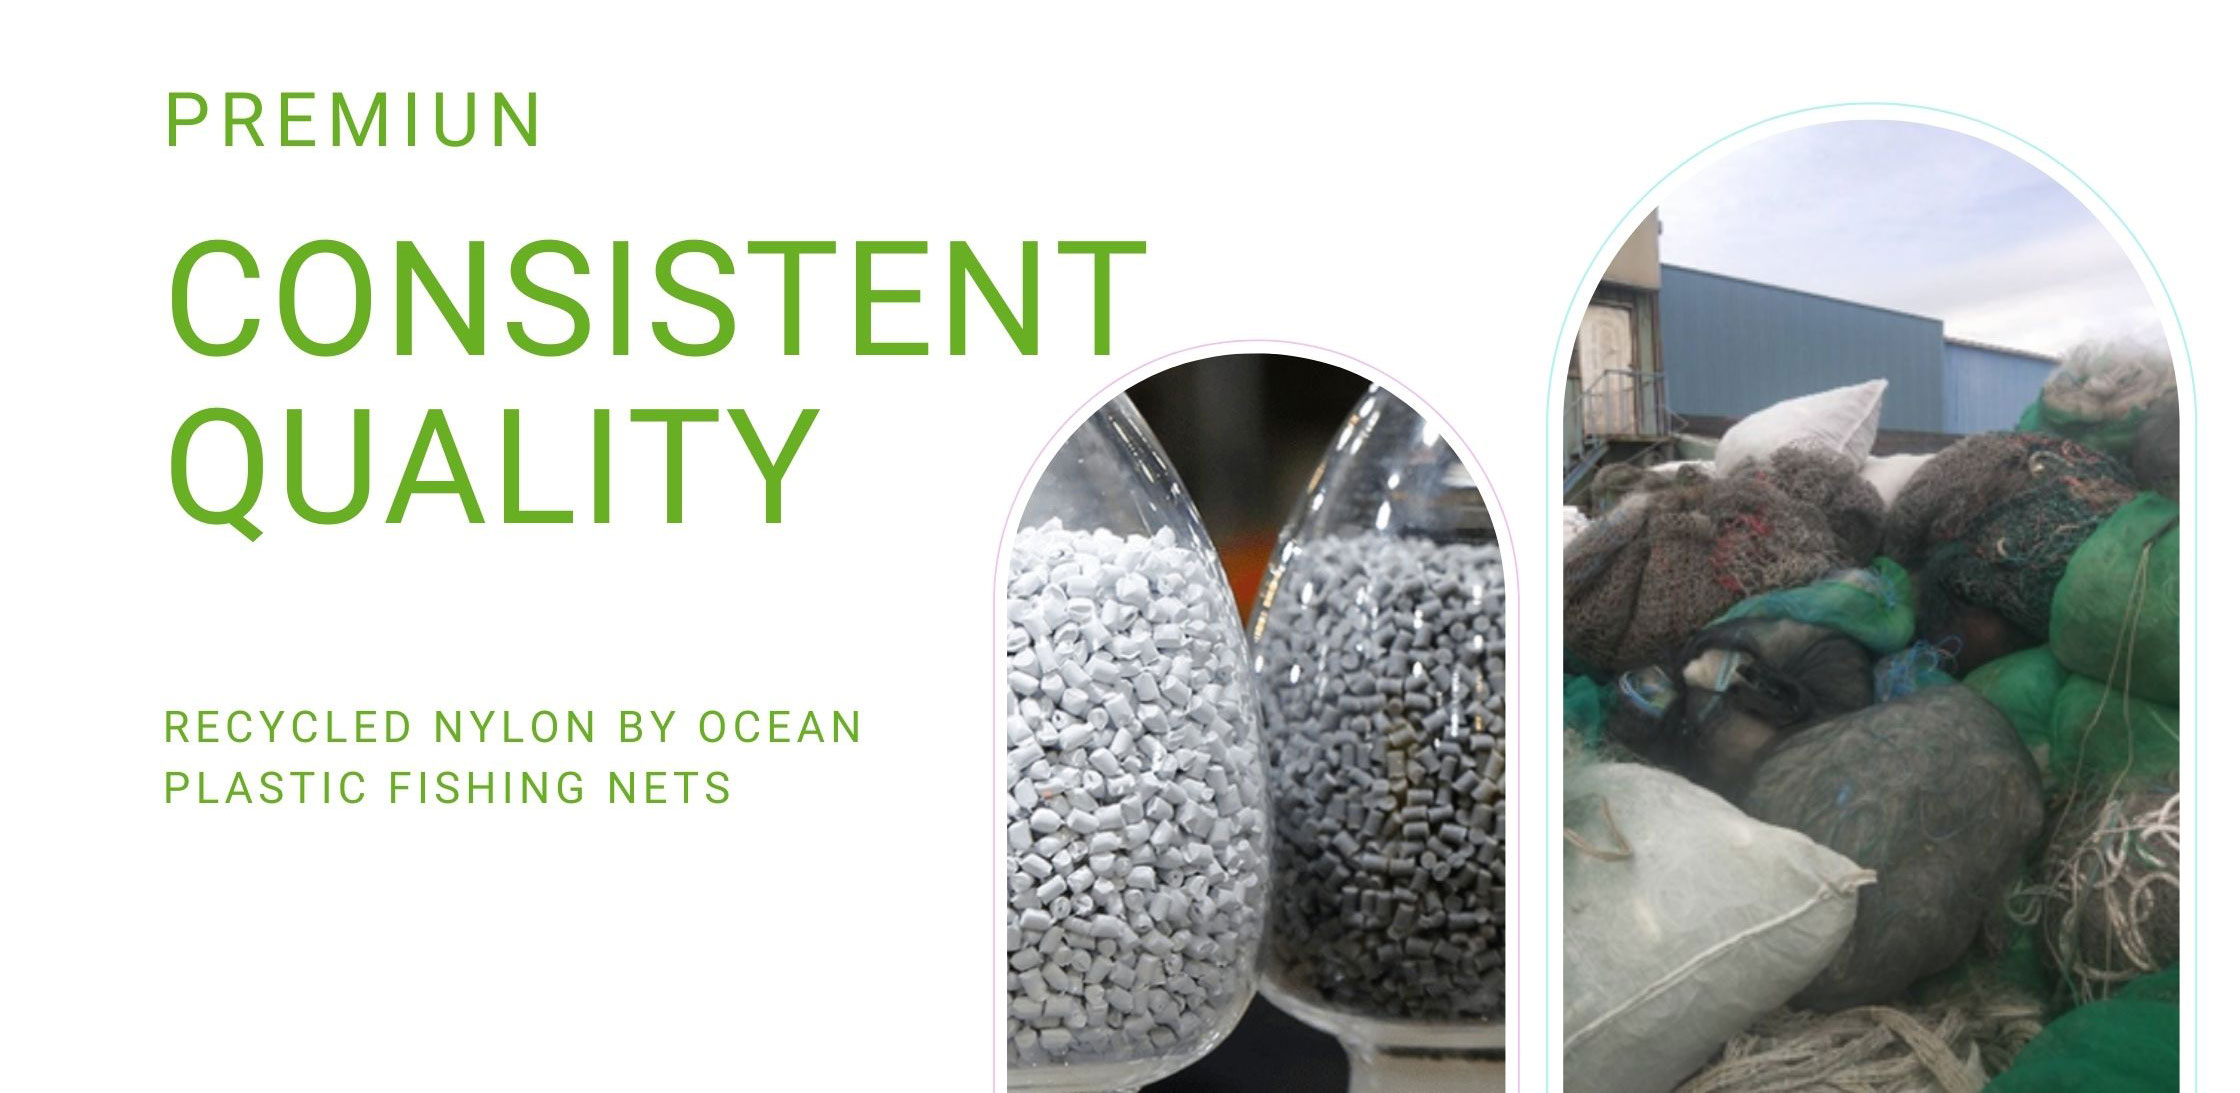 how to select recycle nylon by ocean fishing nets?